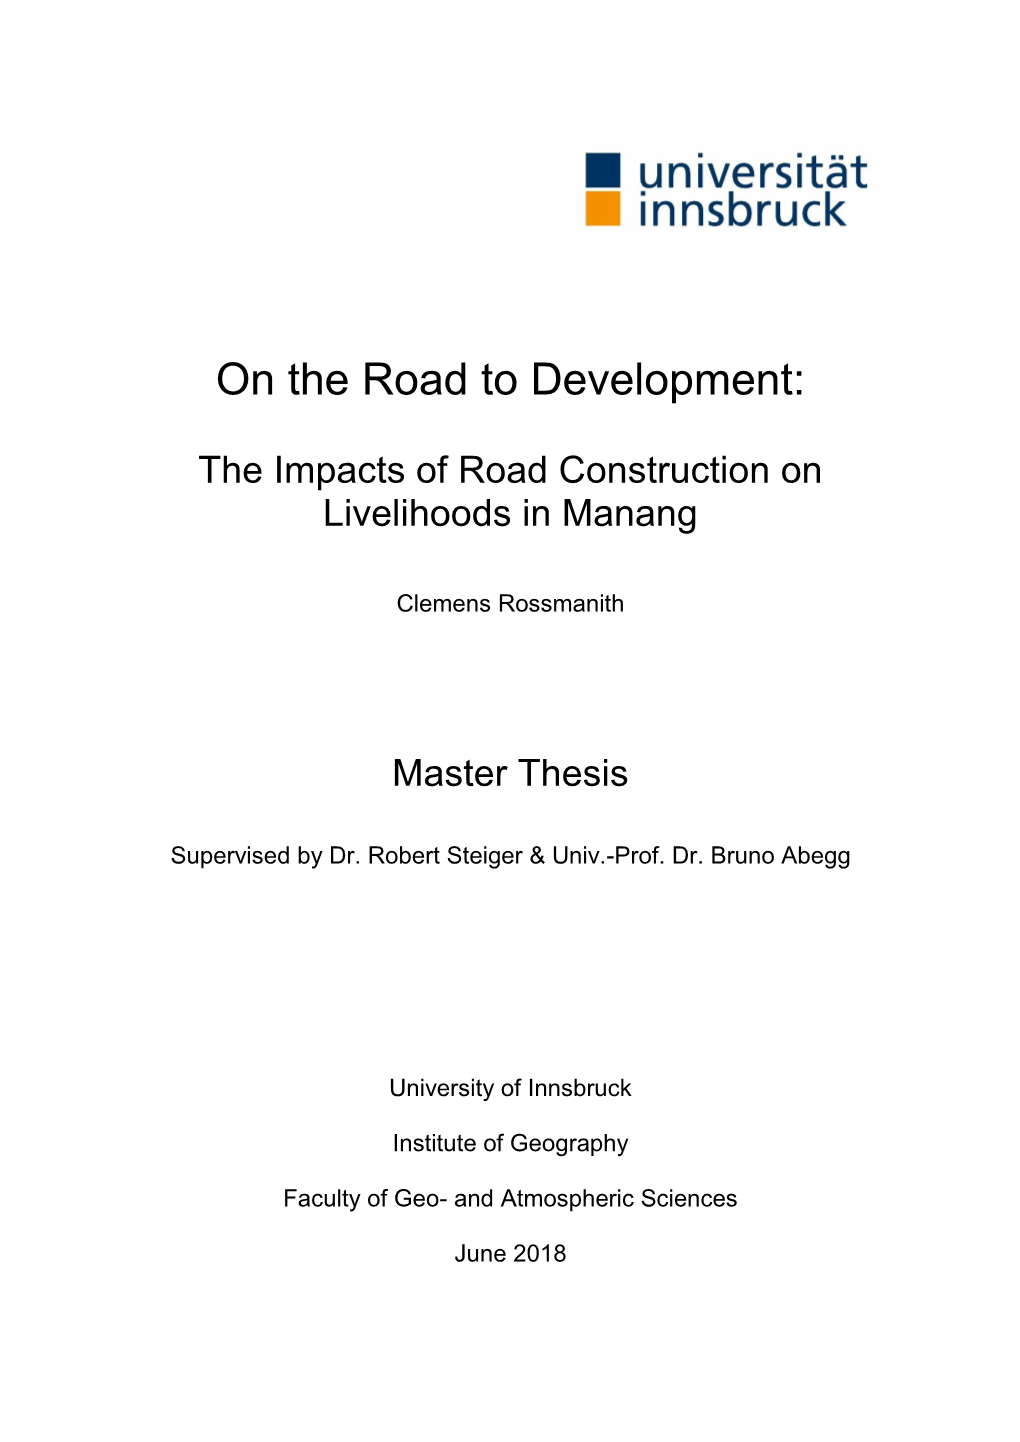 The Impacts of Road Construction on Livelihoods in Manang